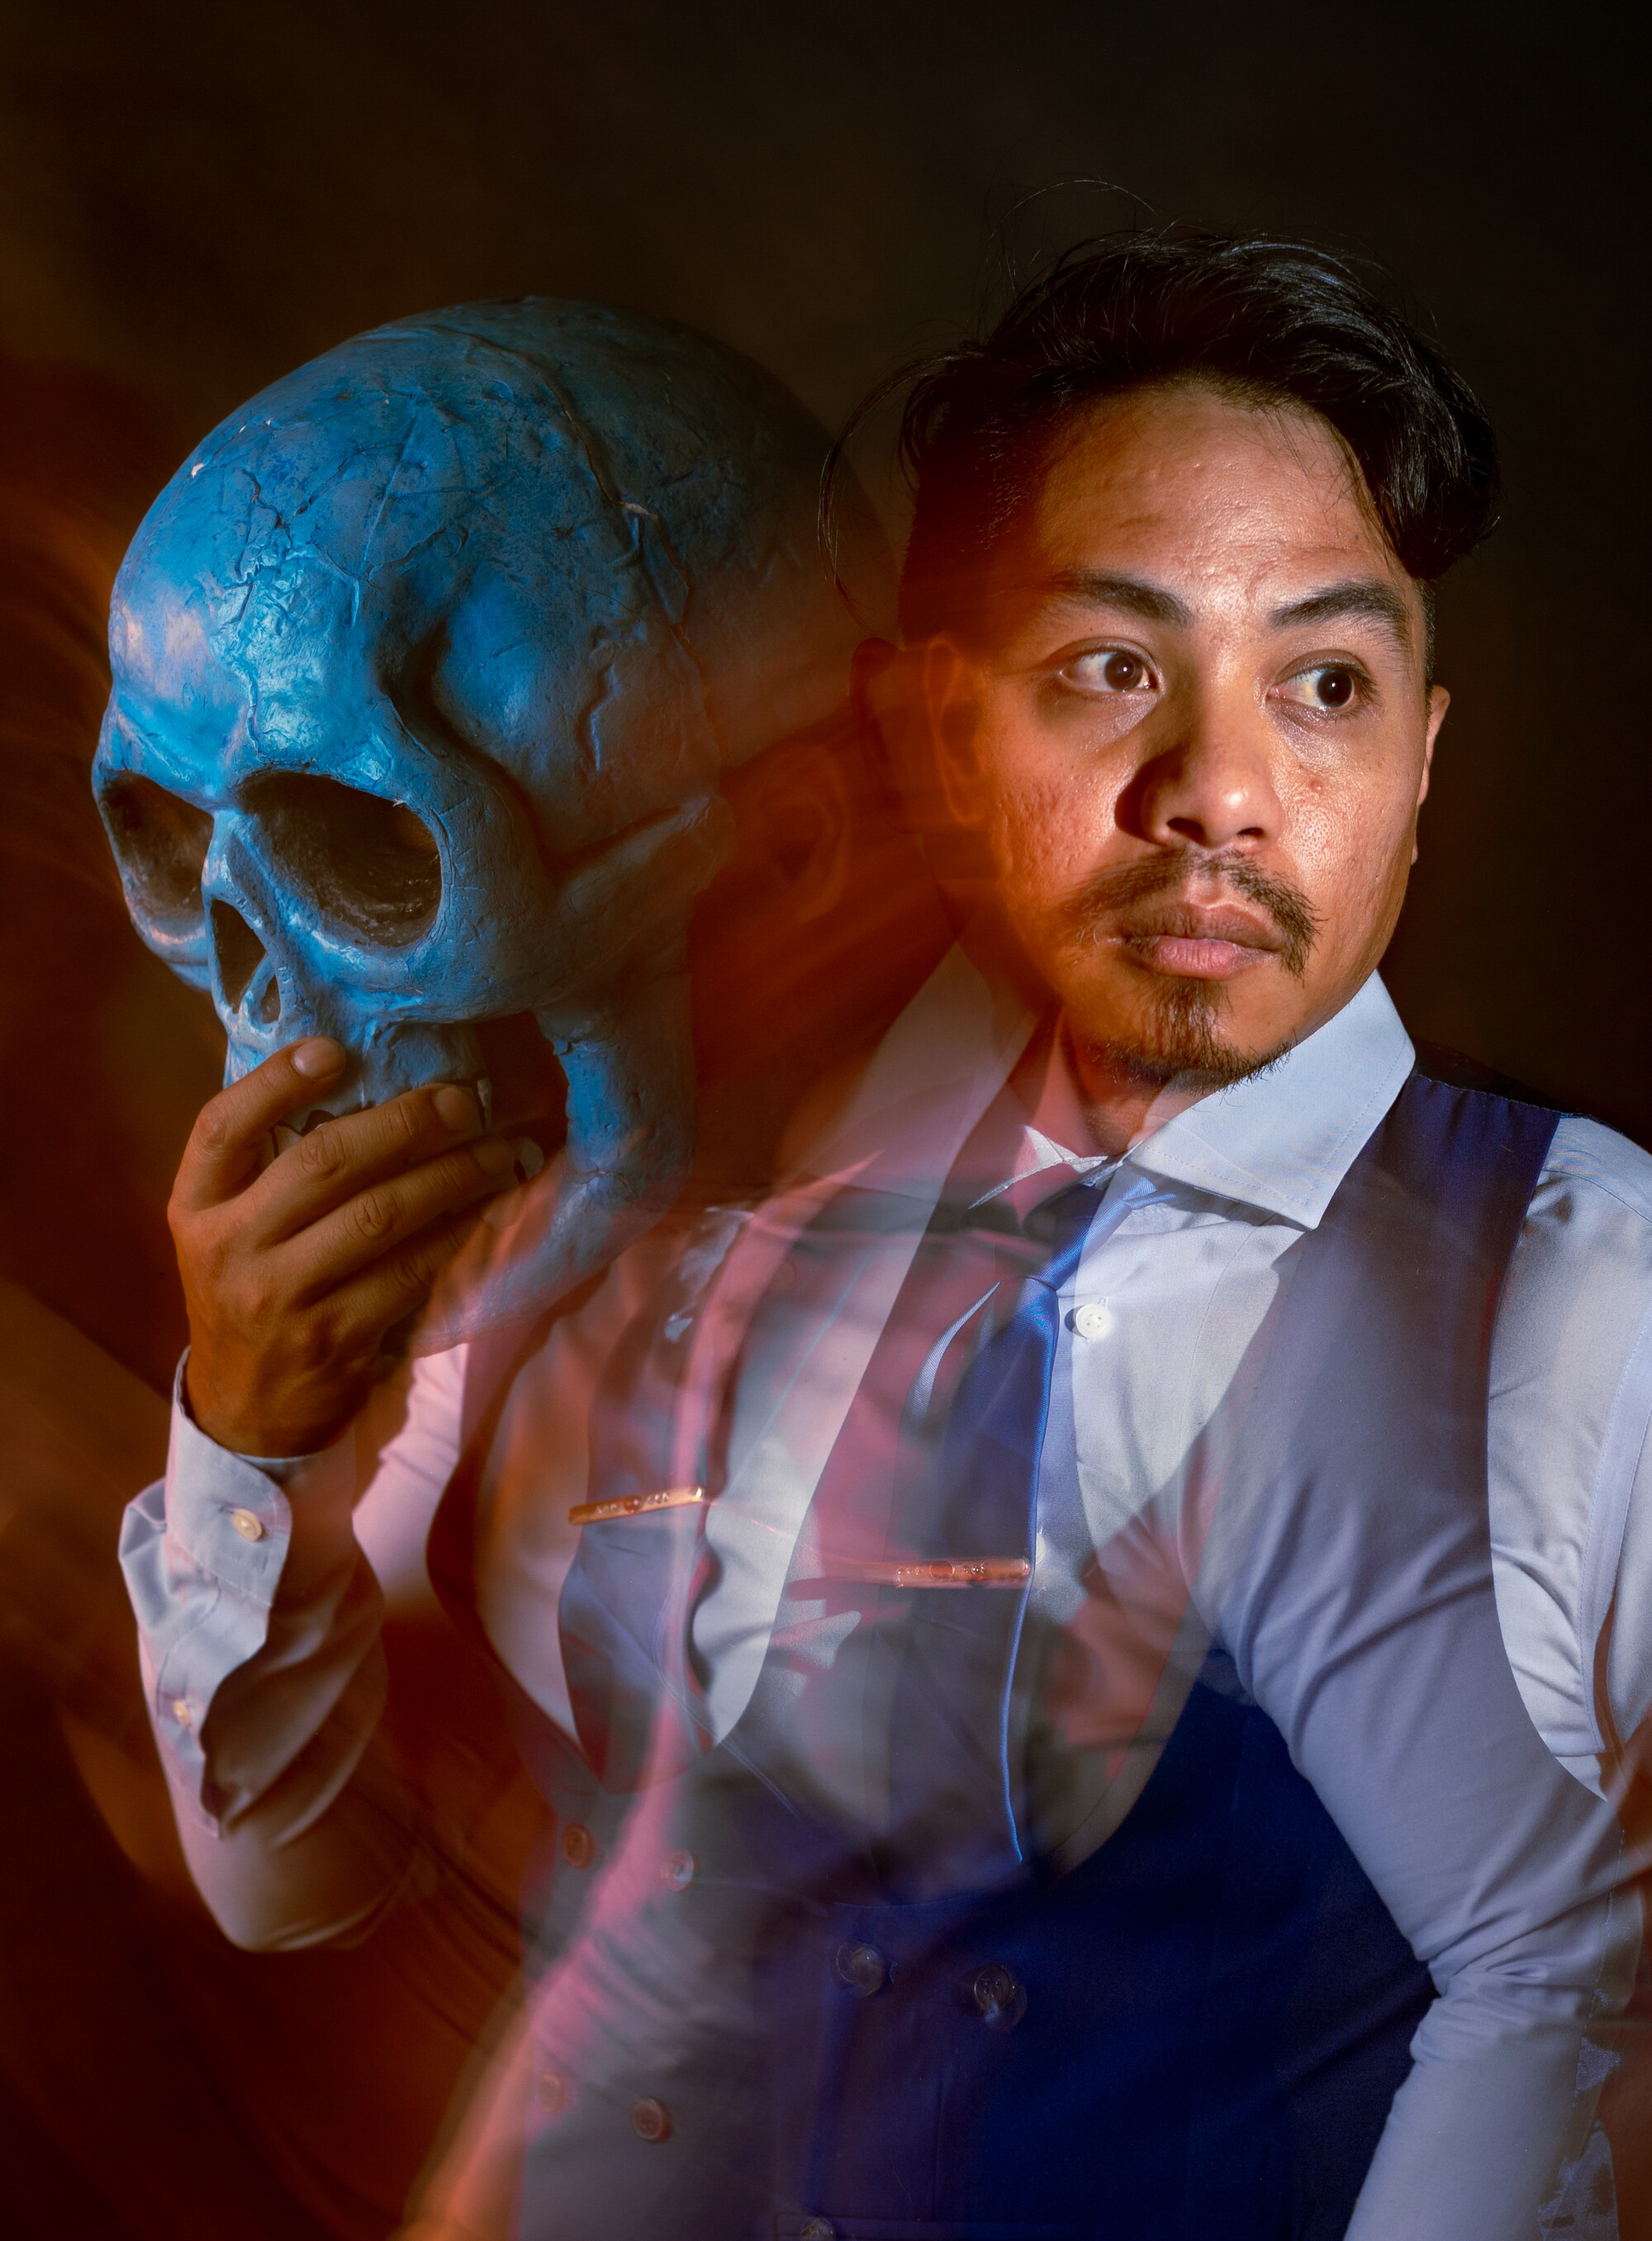 A long exposure image of a man holding a skull mask.